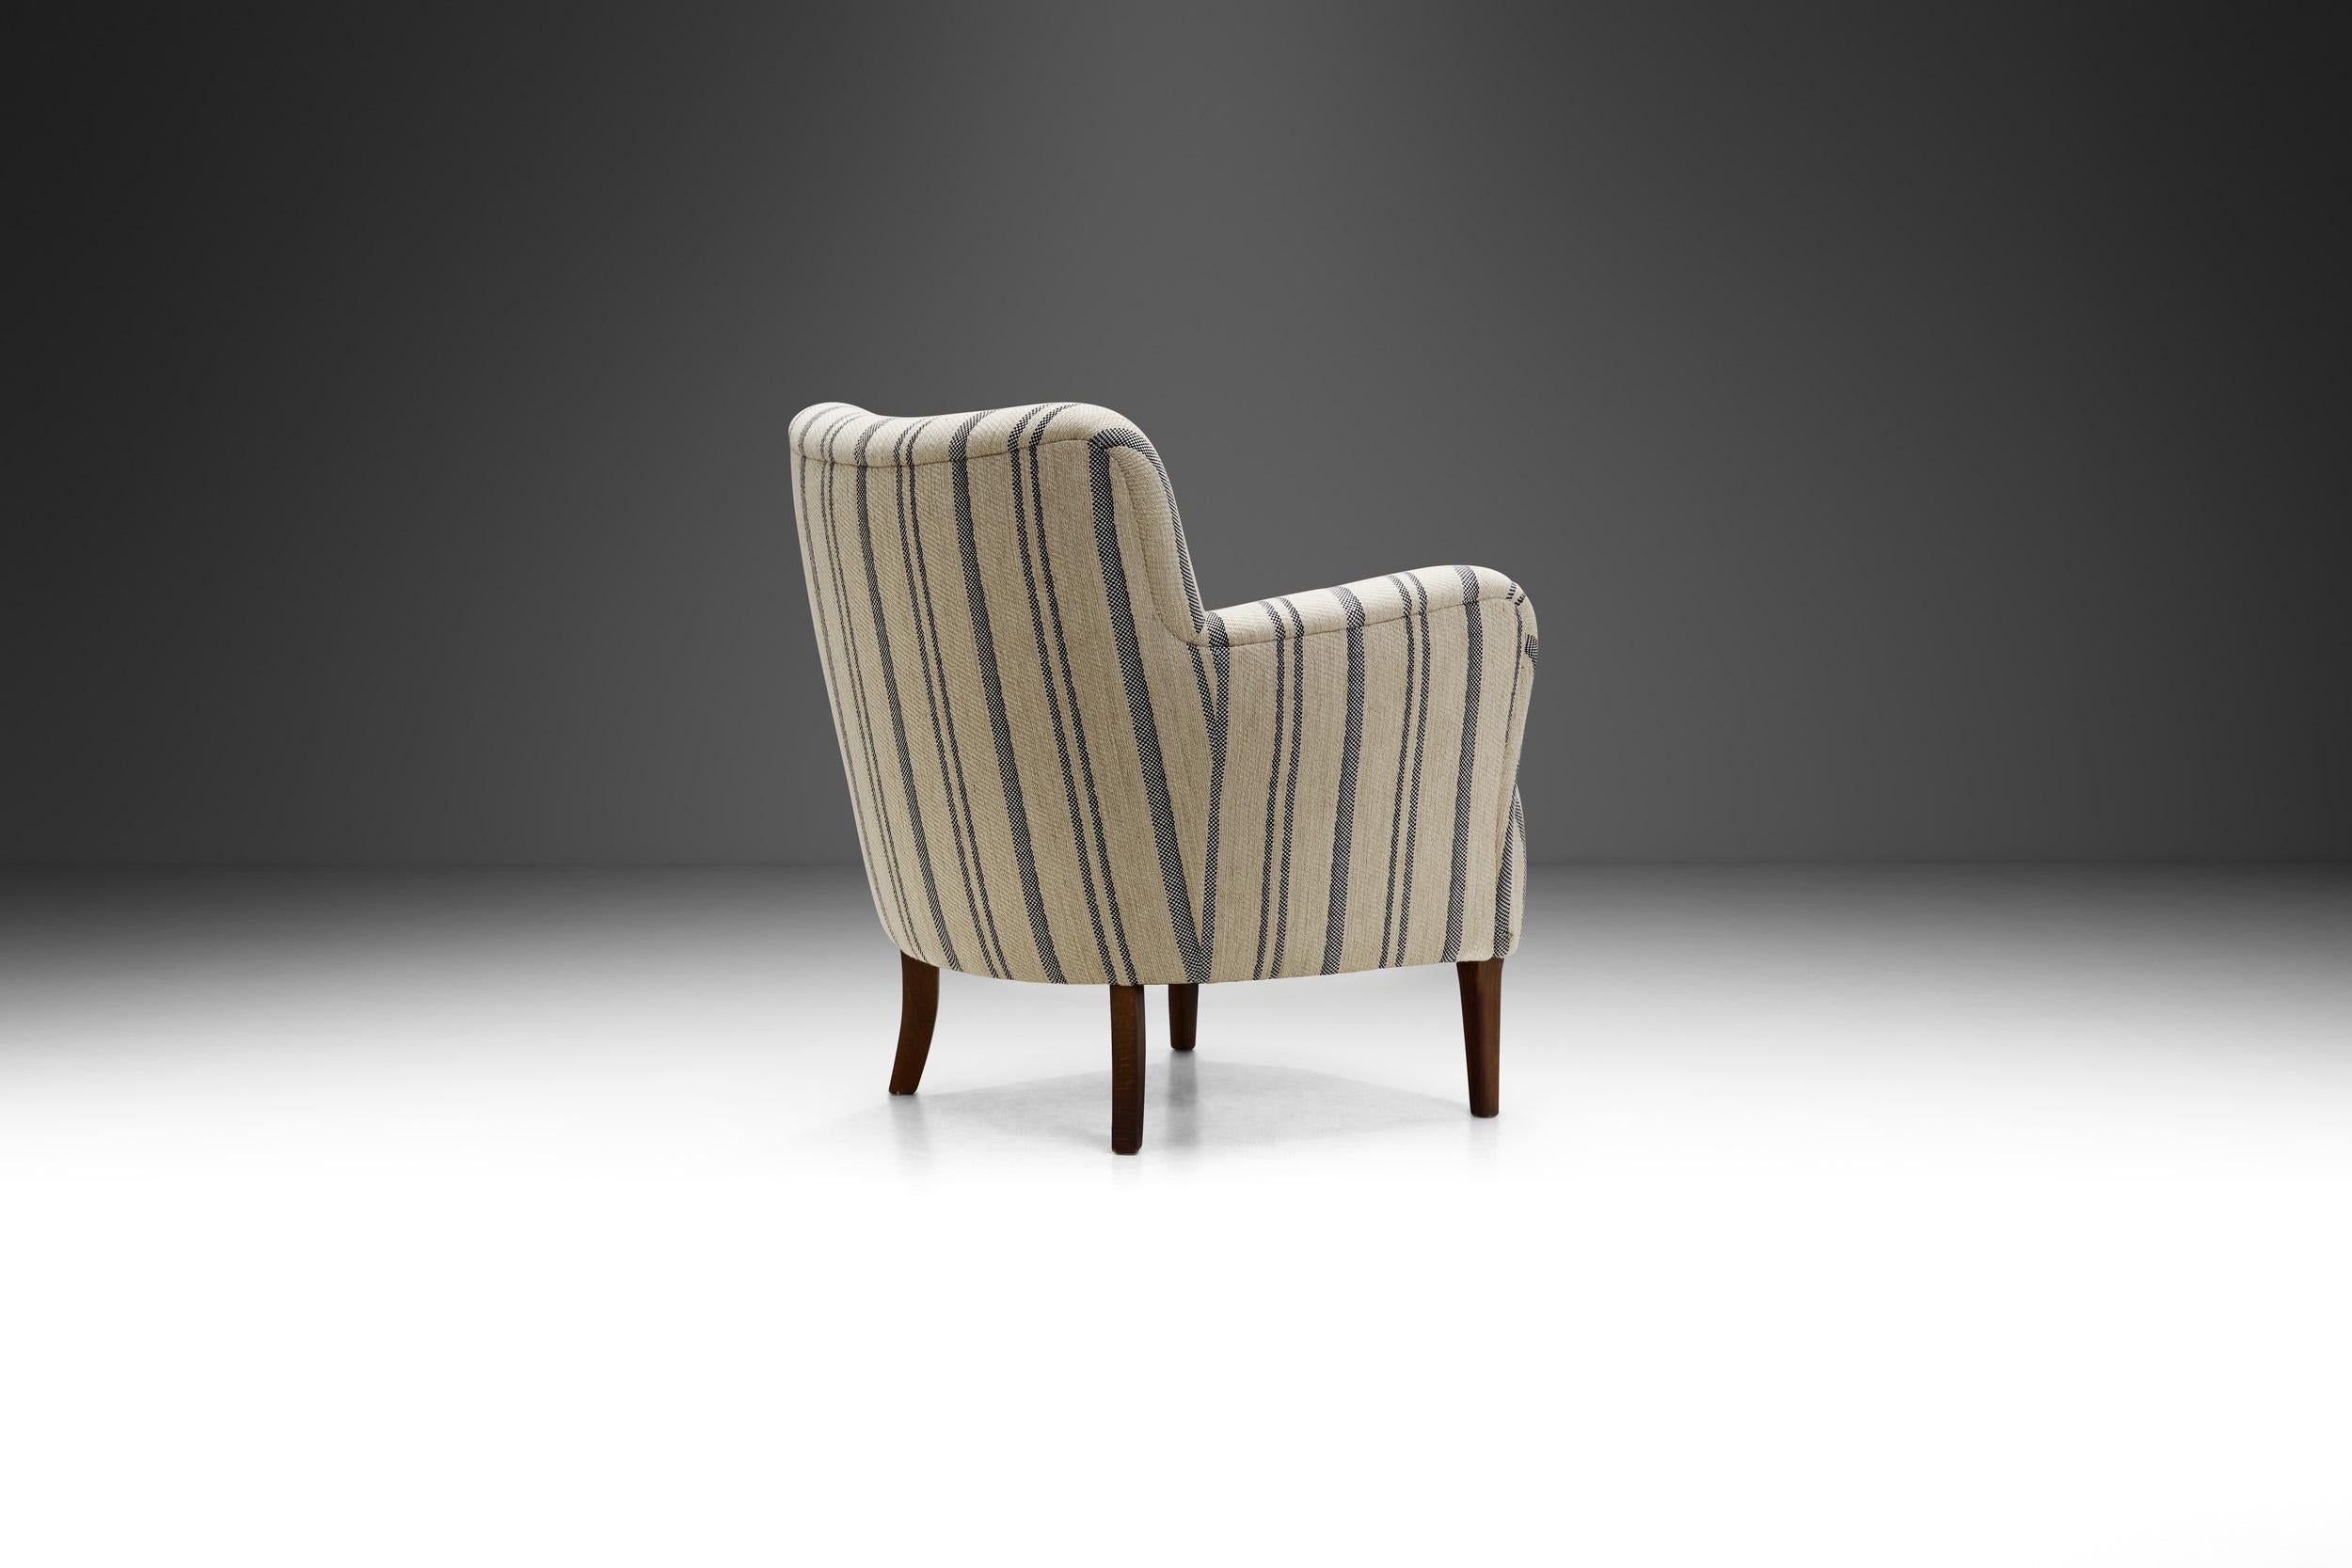 Fabric Mid-Century Modern Striped Lowback Easy Chair, Denmark ca 1940s For Sale